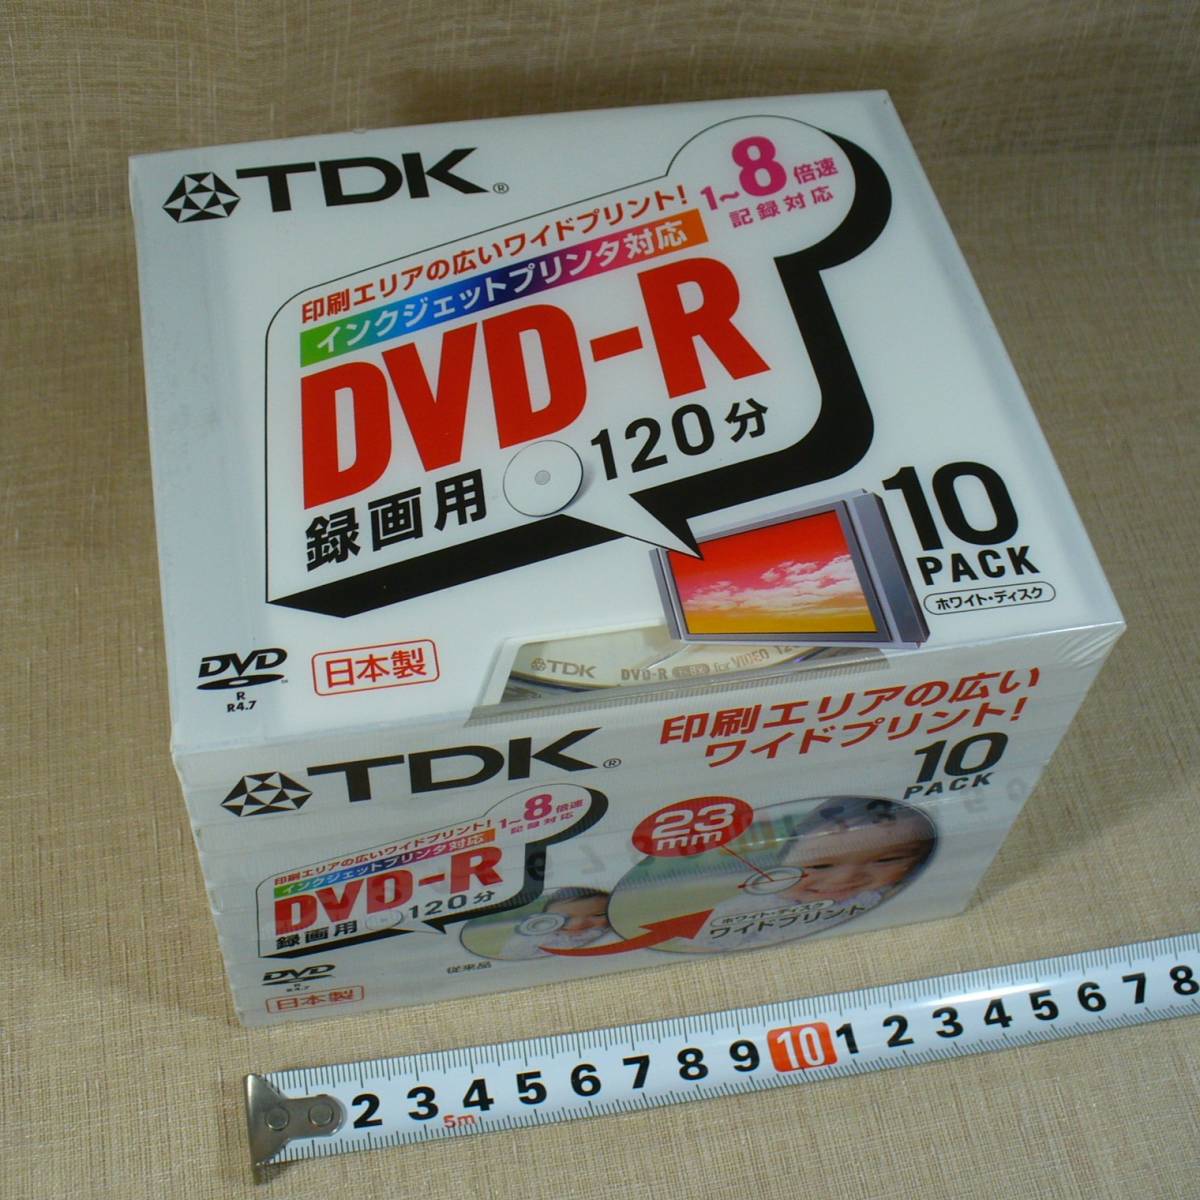 TDK DVD-R120PWX10K video recording for DVD-R 120 minute /8 speed correspondence / ink-jet printer correspondence / white disk / made in Japan 10PACK unopened goods!